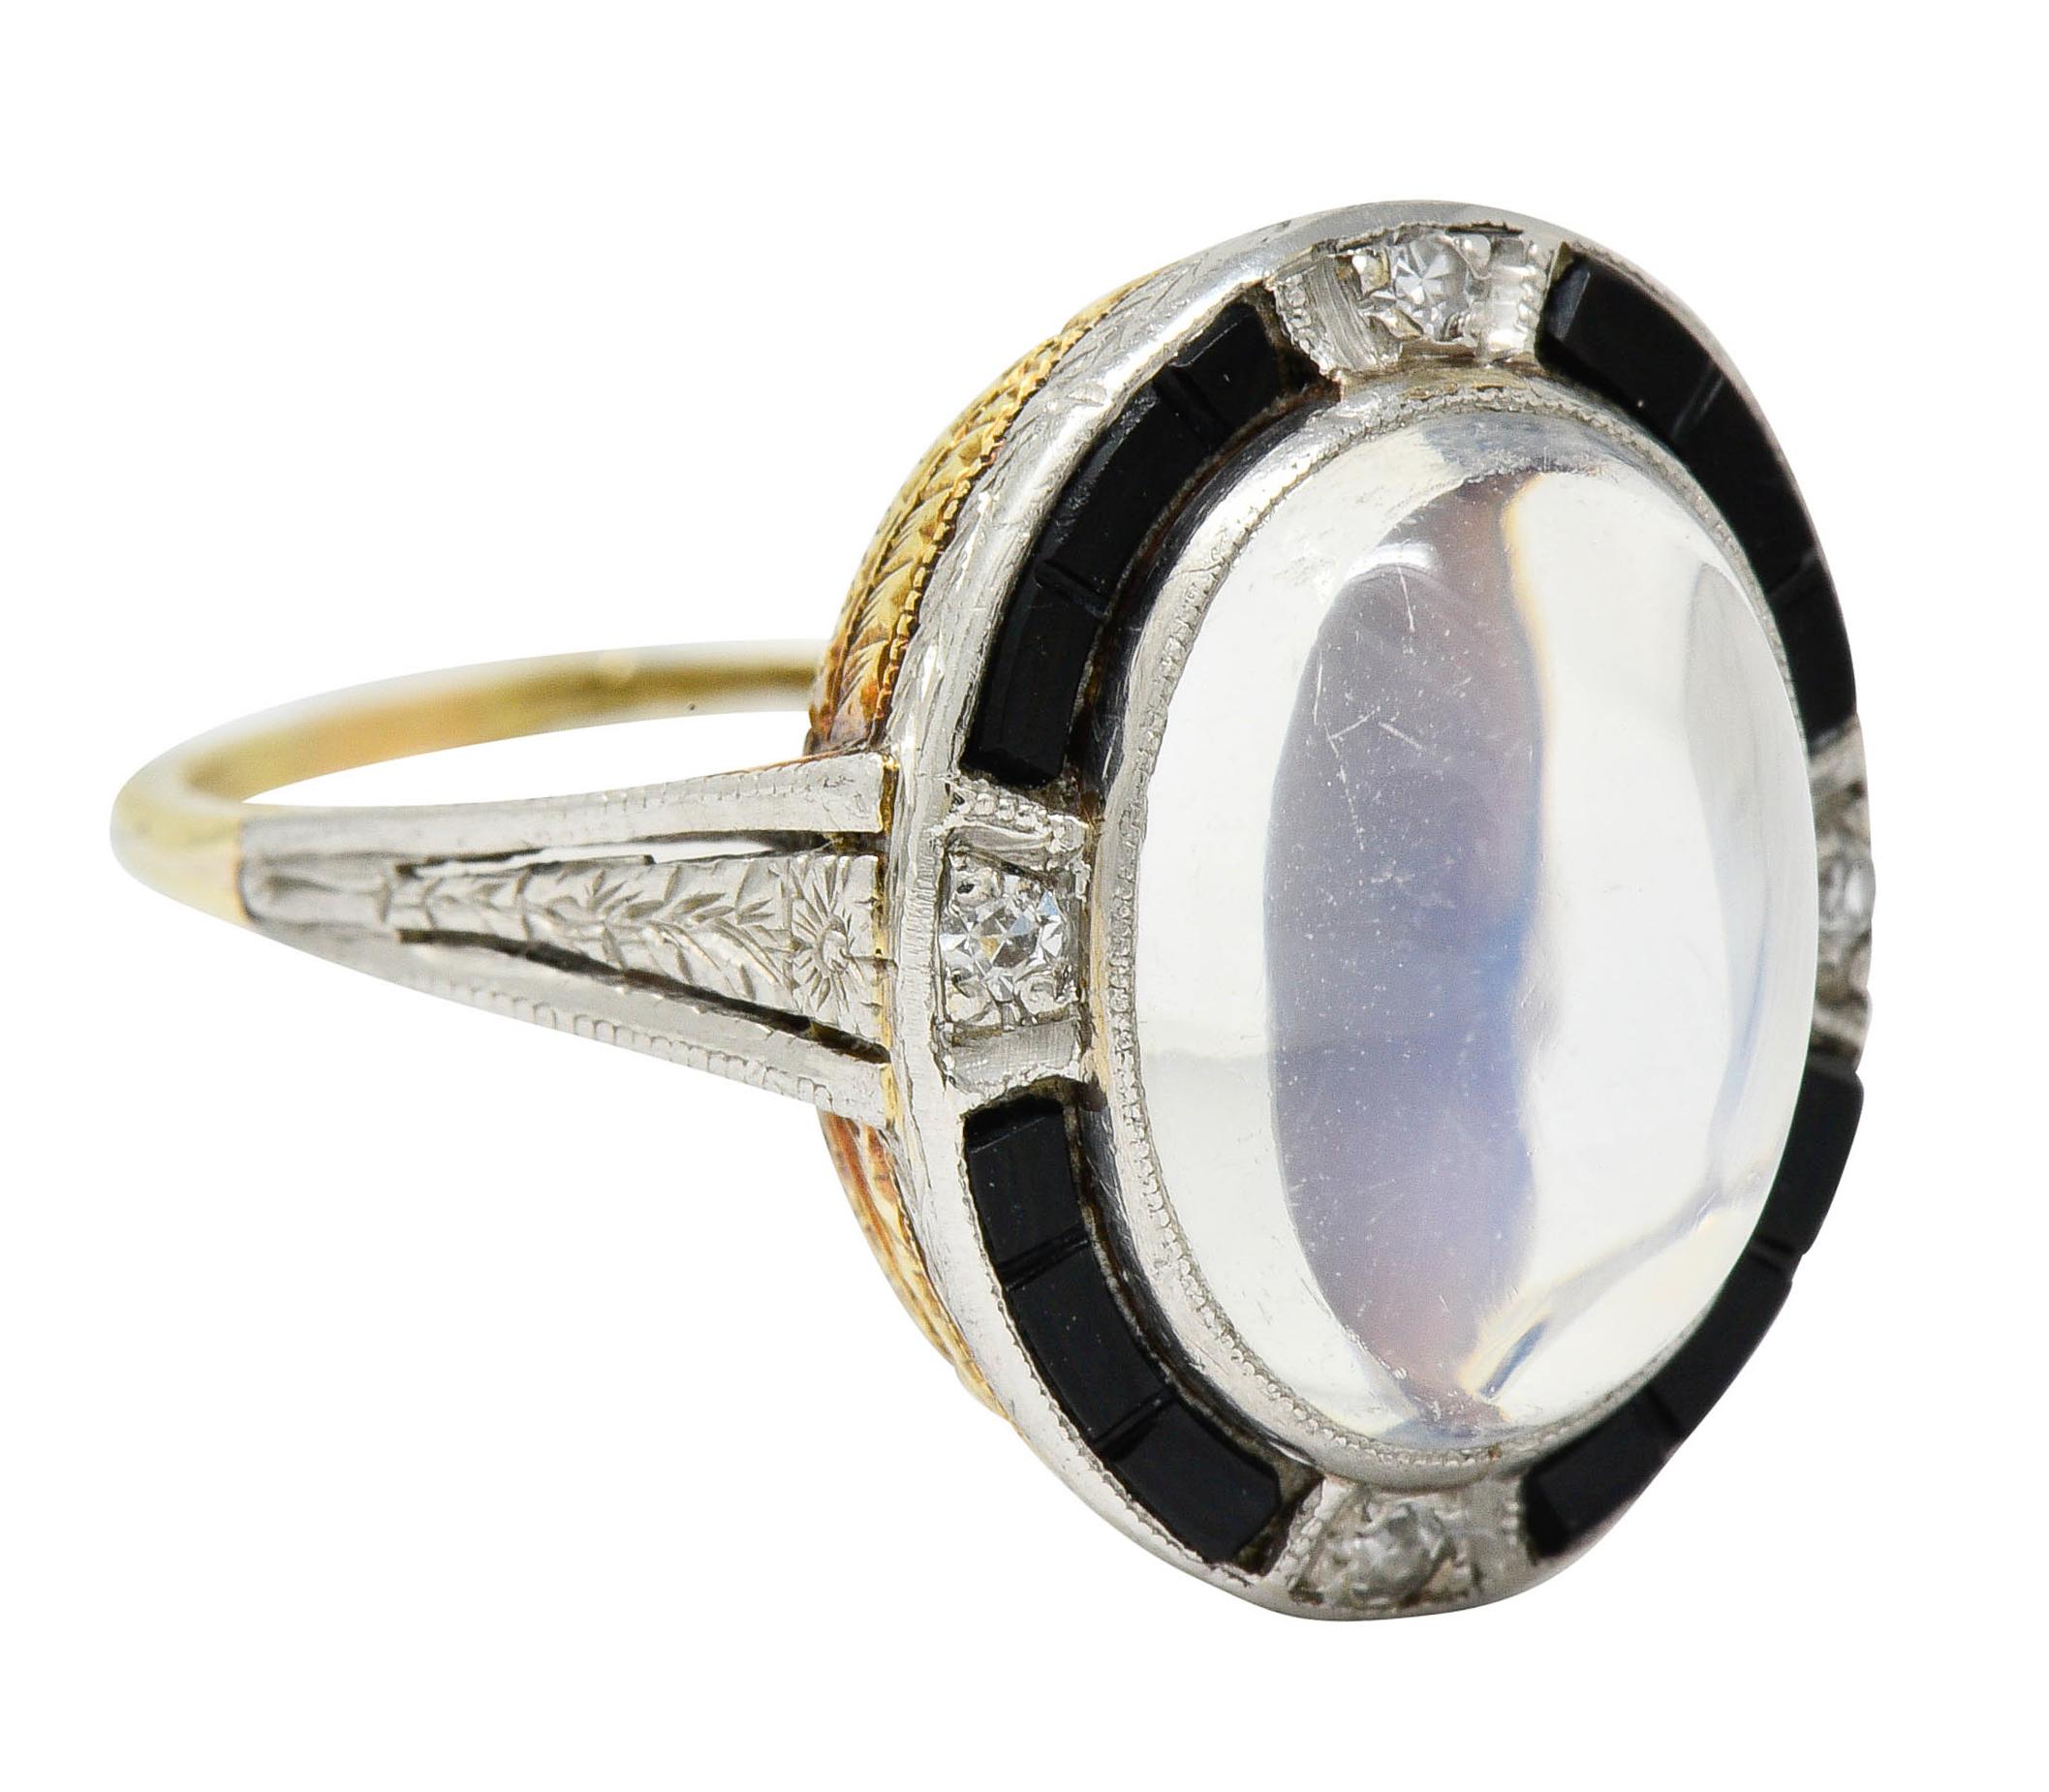 Centering an oval moonstone cabochon measuring approximately 11.6 x 8.7 mm

Translucent with strongly billowing blue adularescence and surrounded by a calibré cut onyx halo

Accented by single cut diamonds, bead set at each cardinal point, weighing